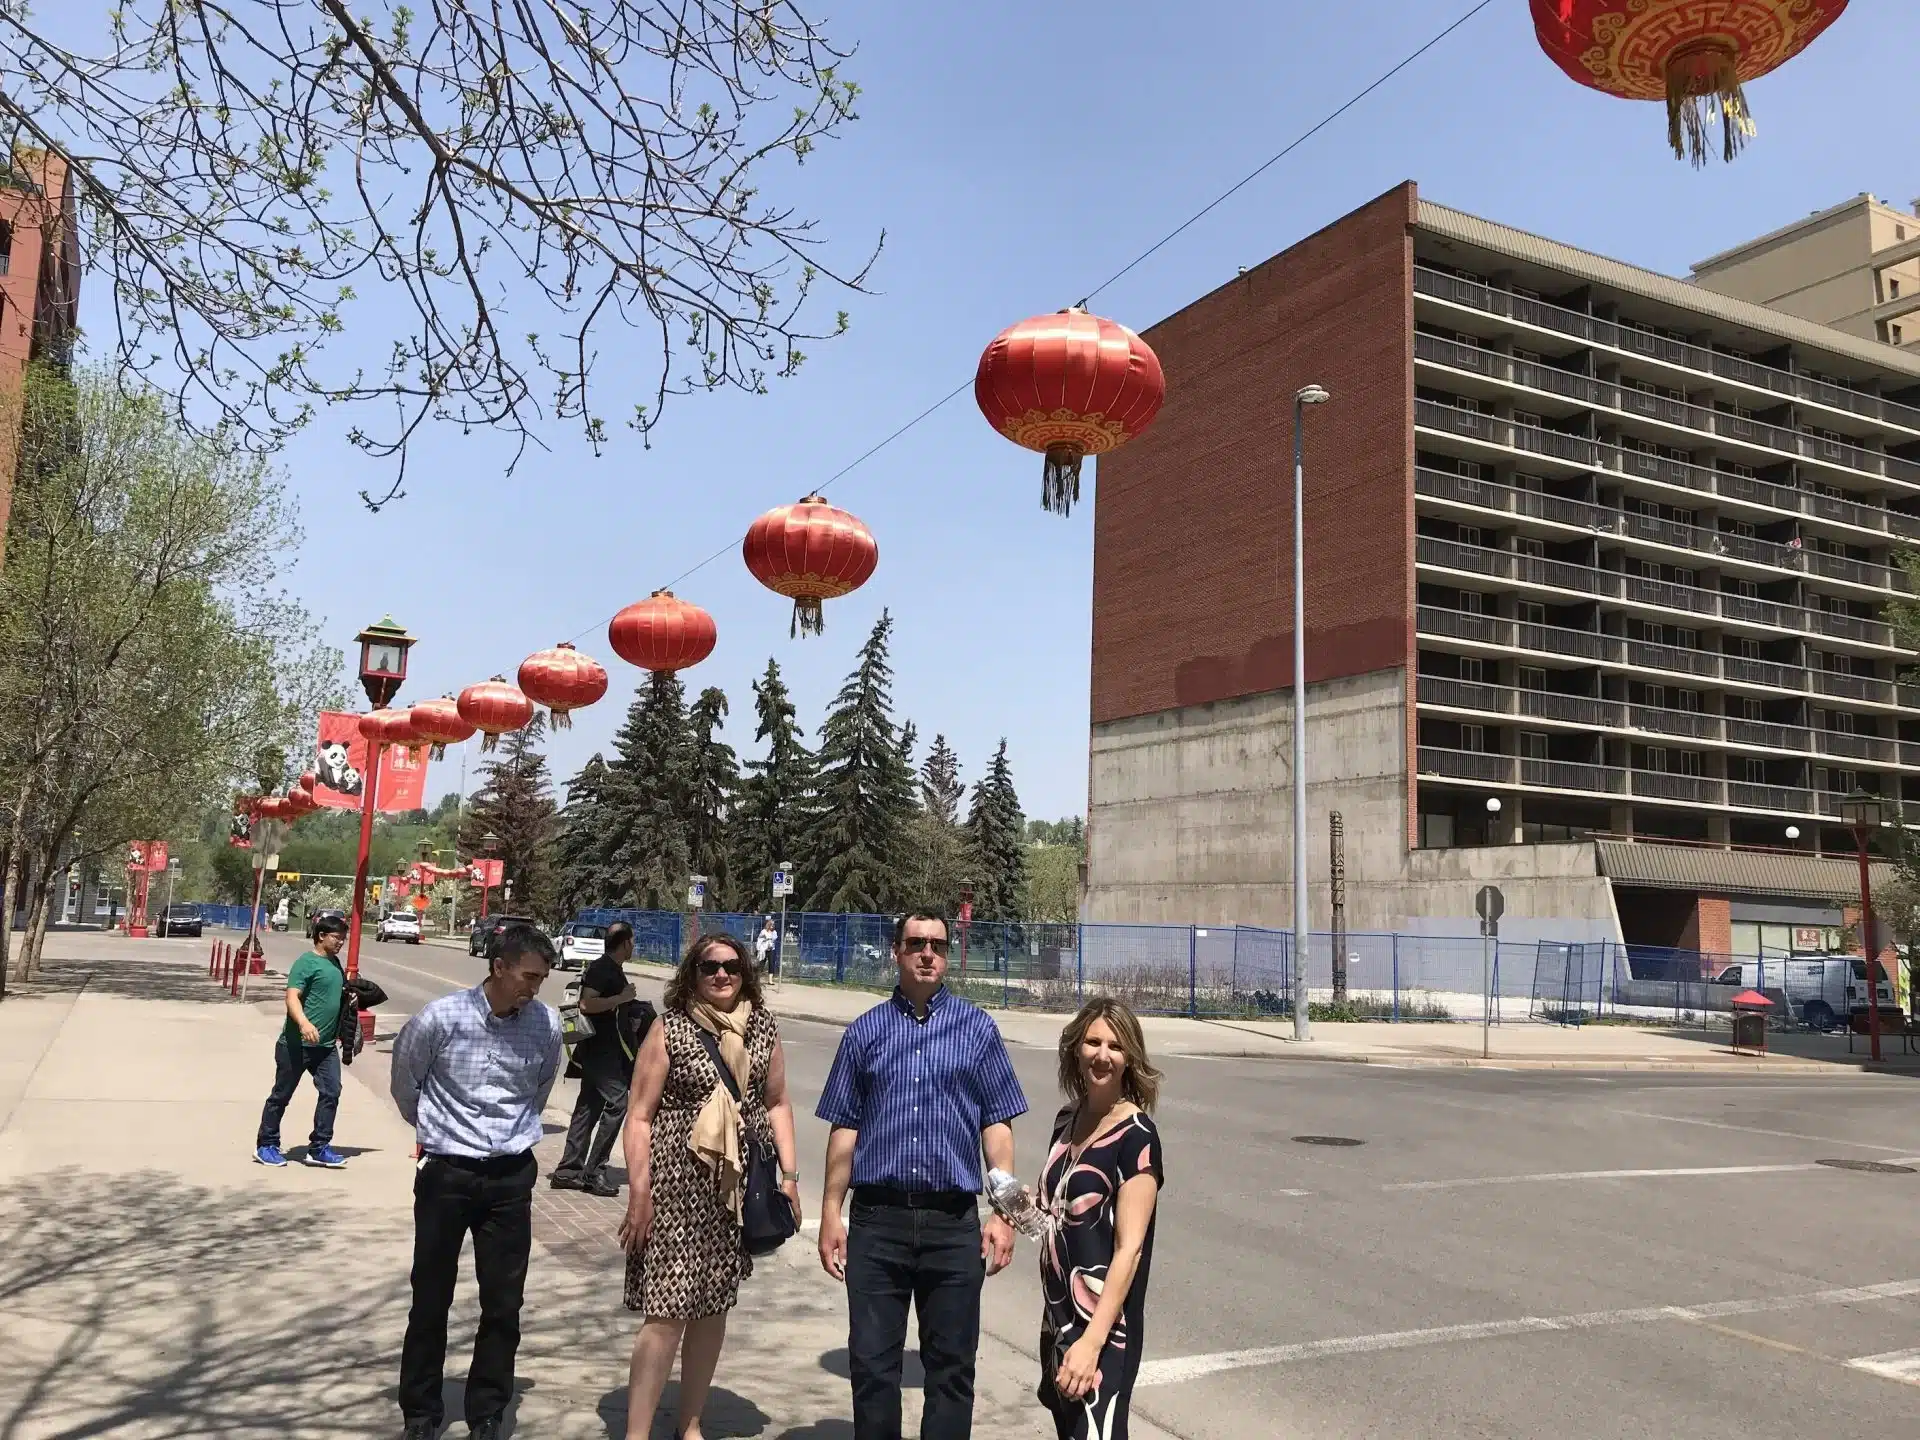 Corporate scavenger hunt team under the red lanterns in Chinatown of Calgary